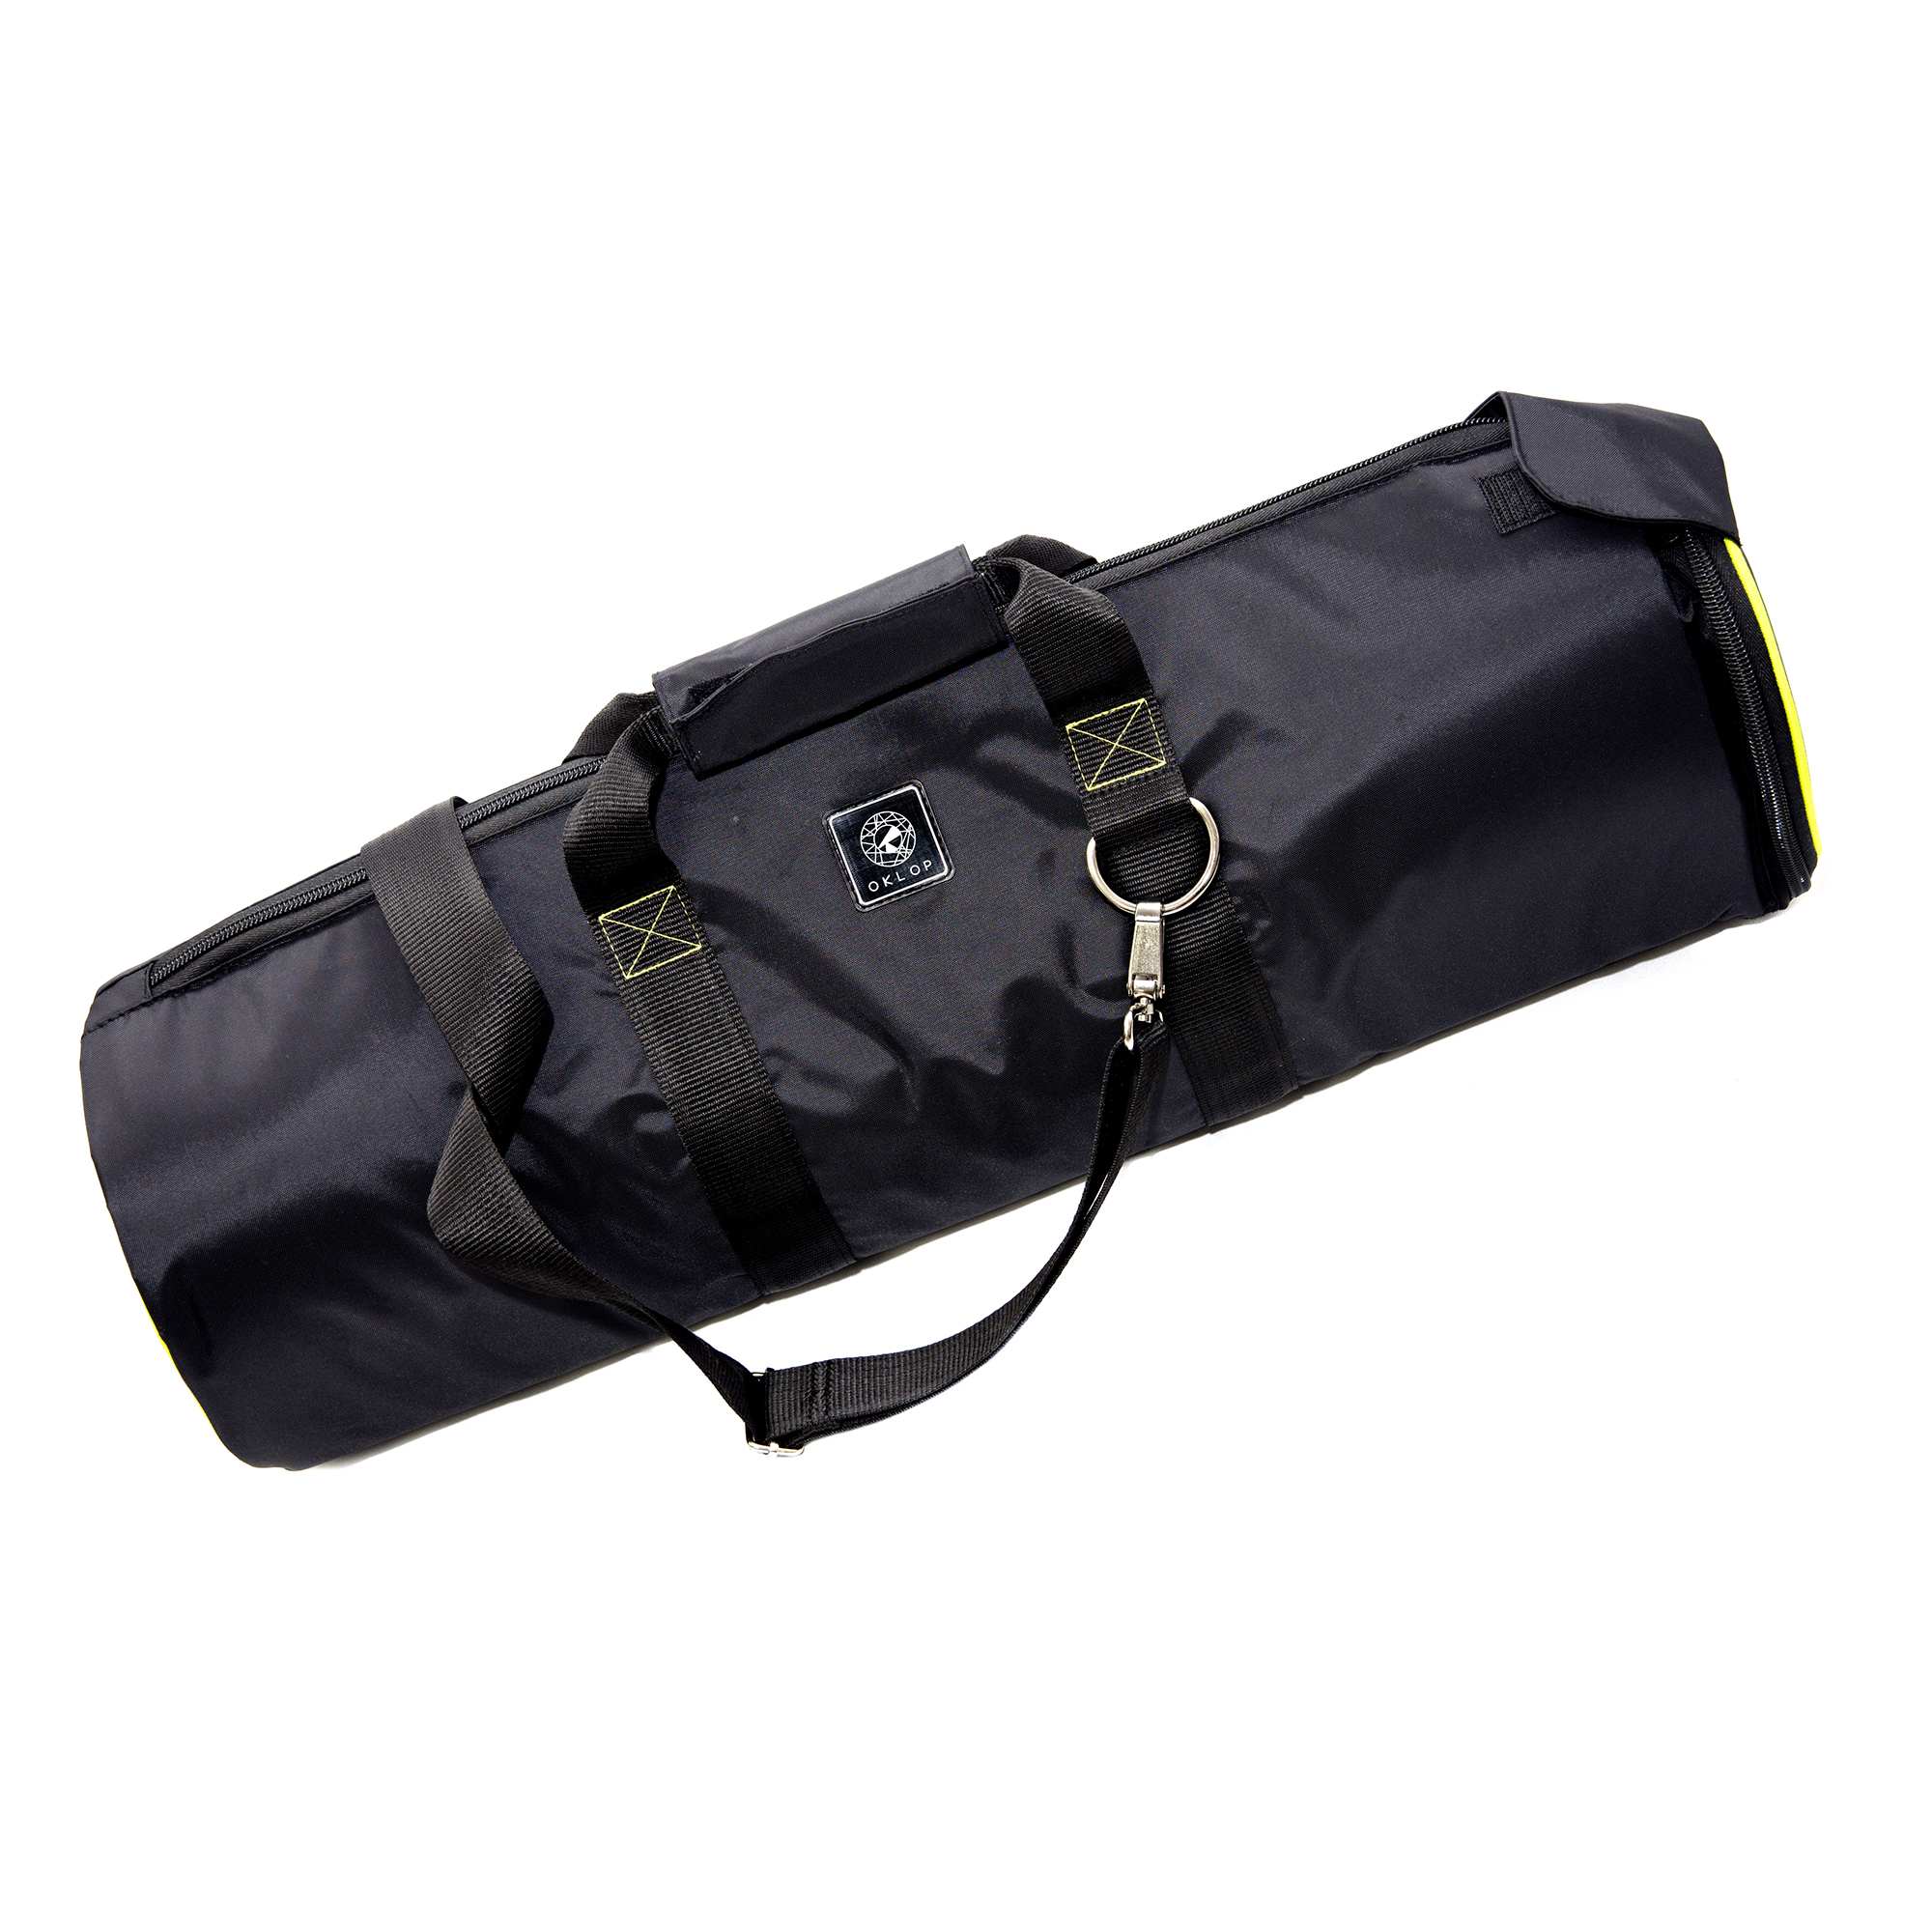 Oklop Padded Bag for 80/600 APO Refractors